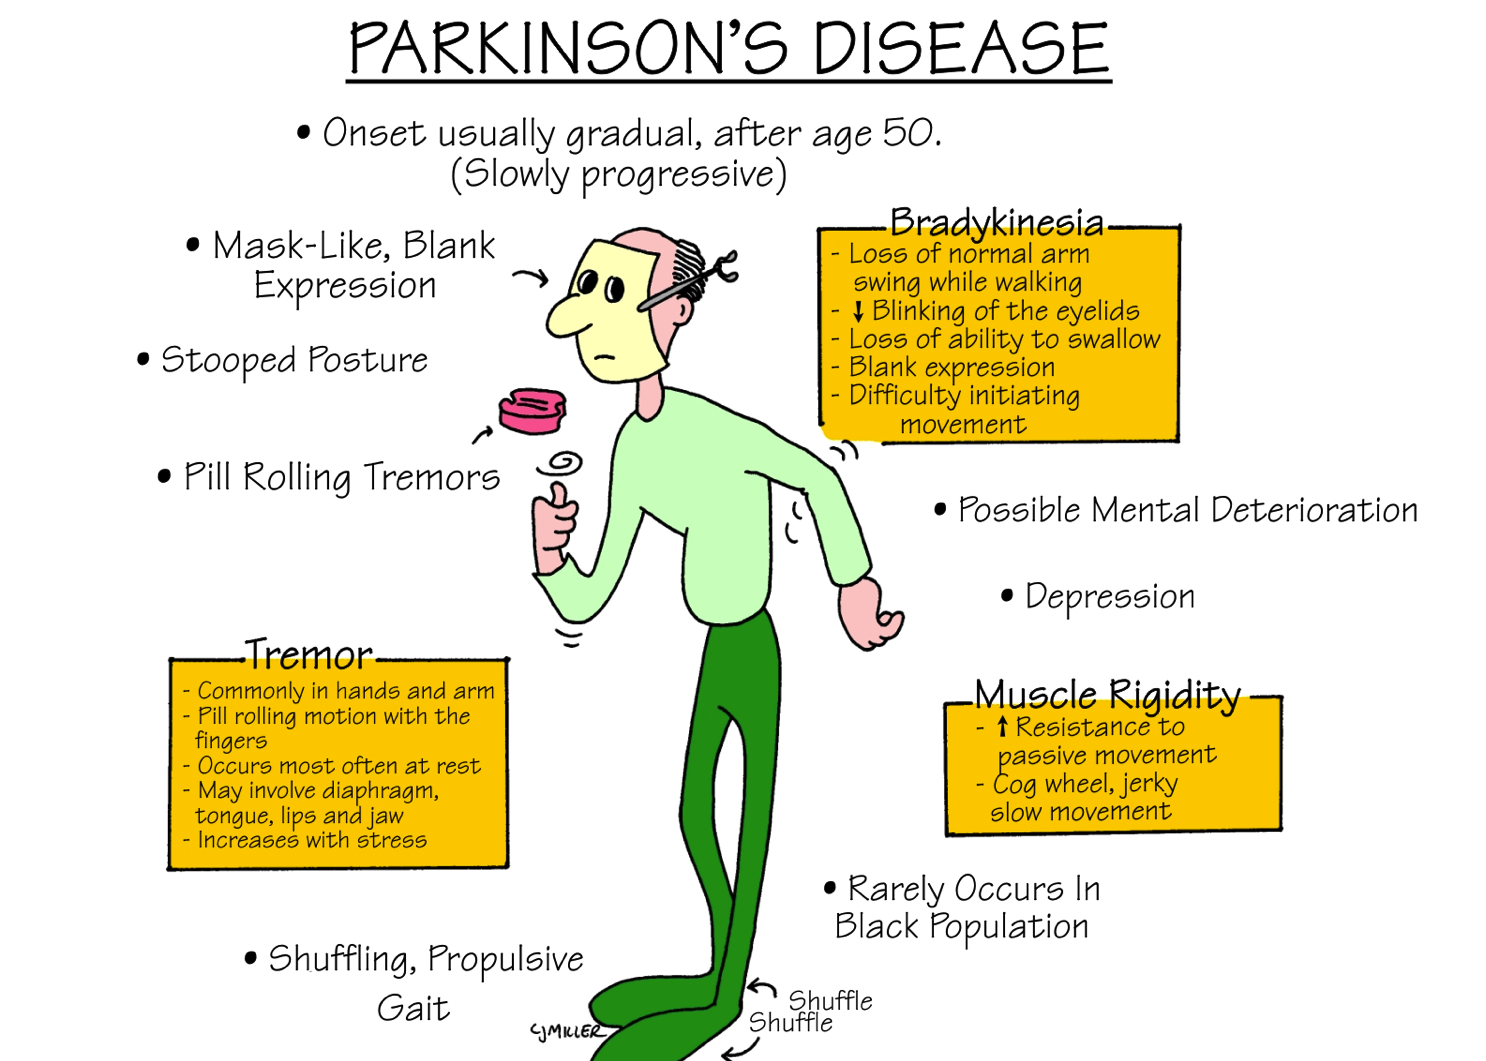 Who Can Get Parkinson